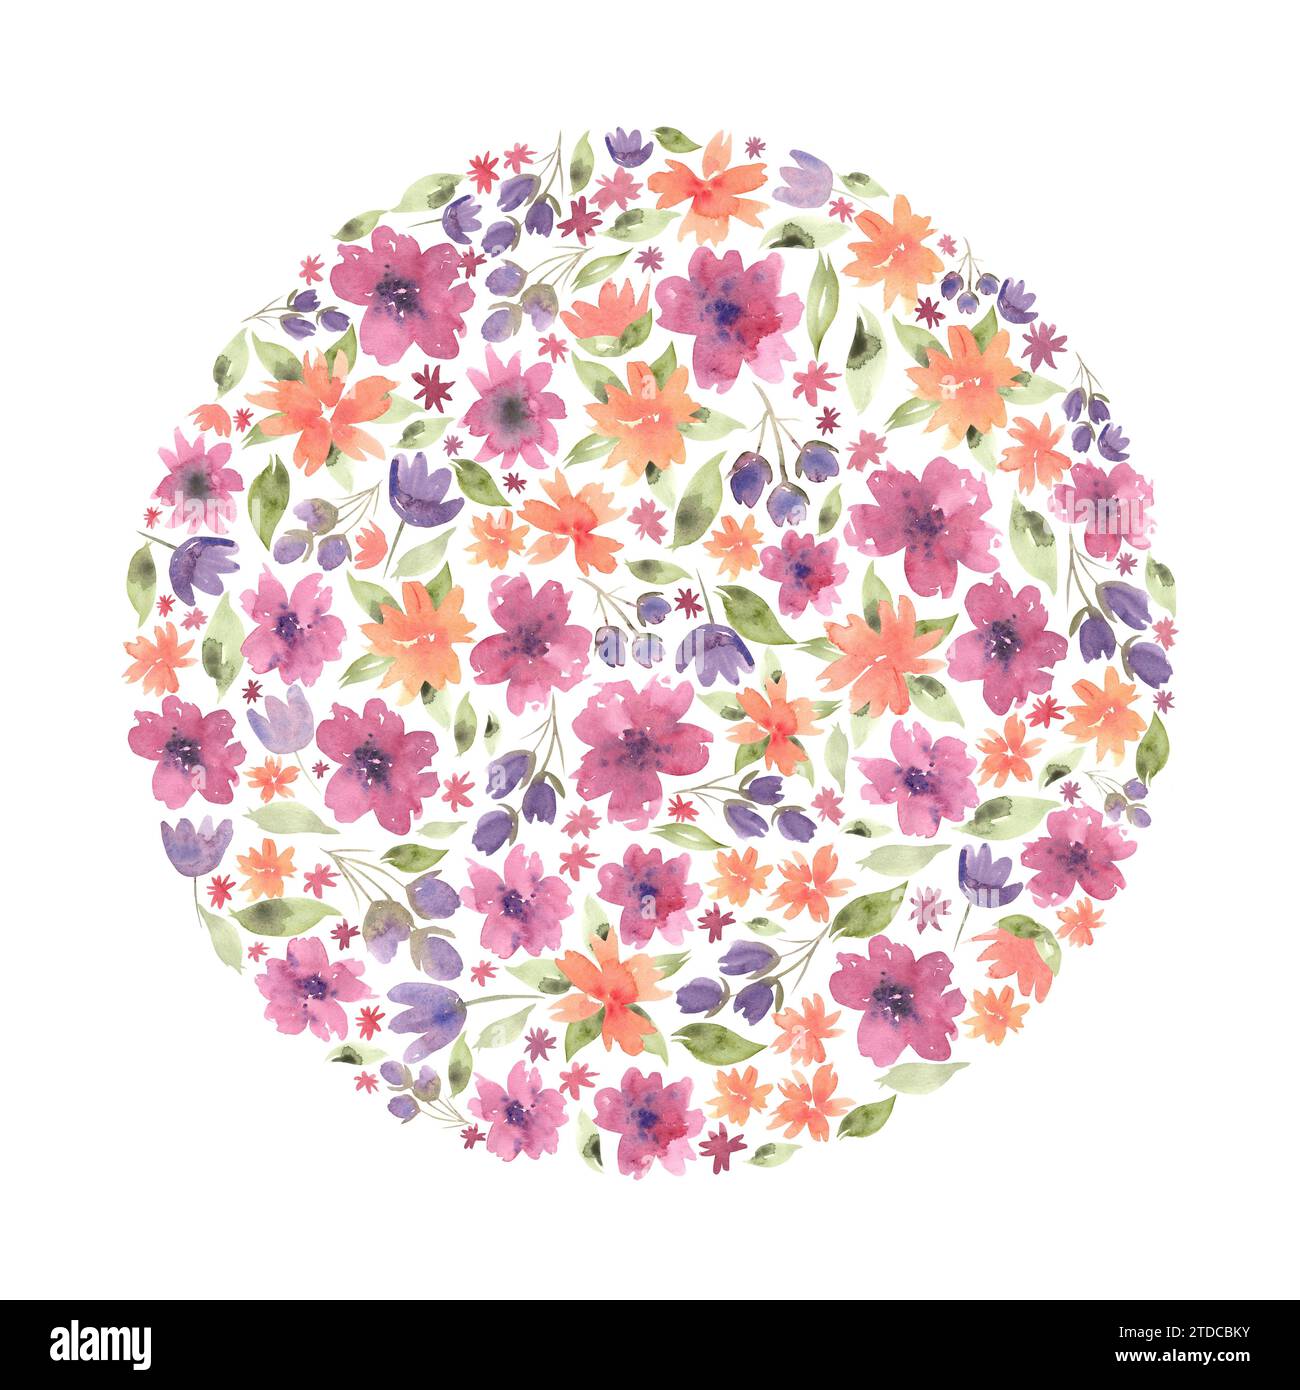 Watercolor floral round composition of different flowers and green leaves. Hand drawn illustration of botanical template for greeting cards or wedding Stock Photo